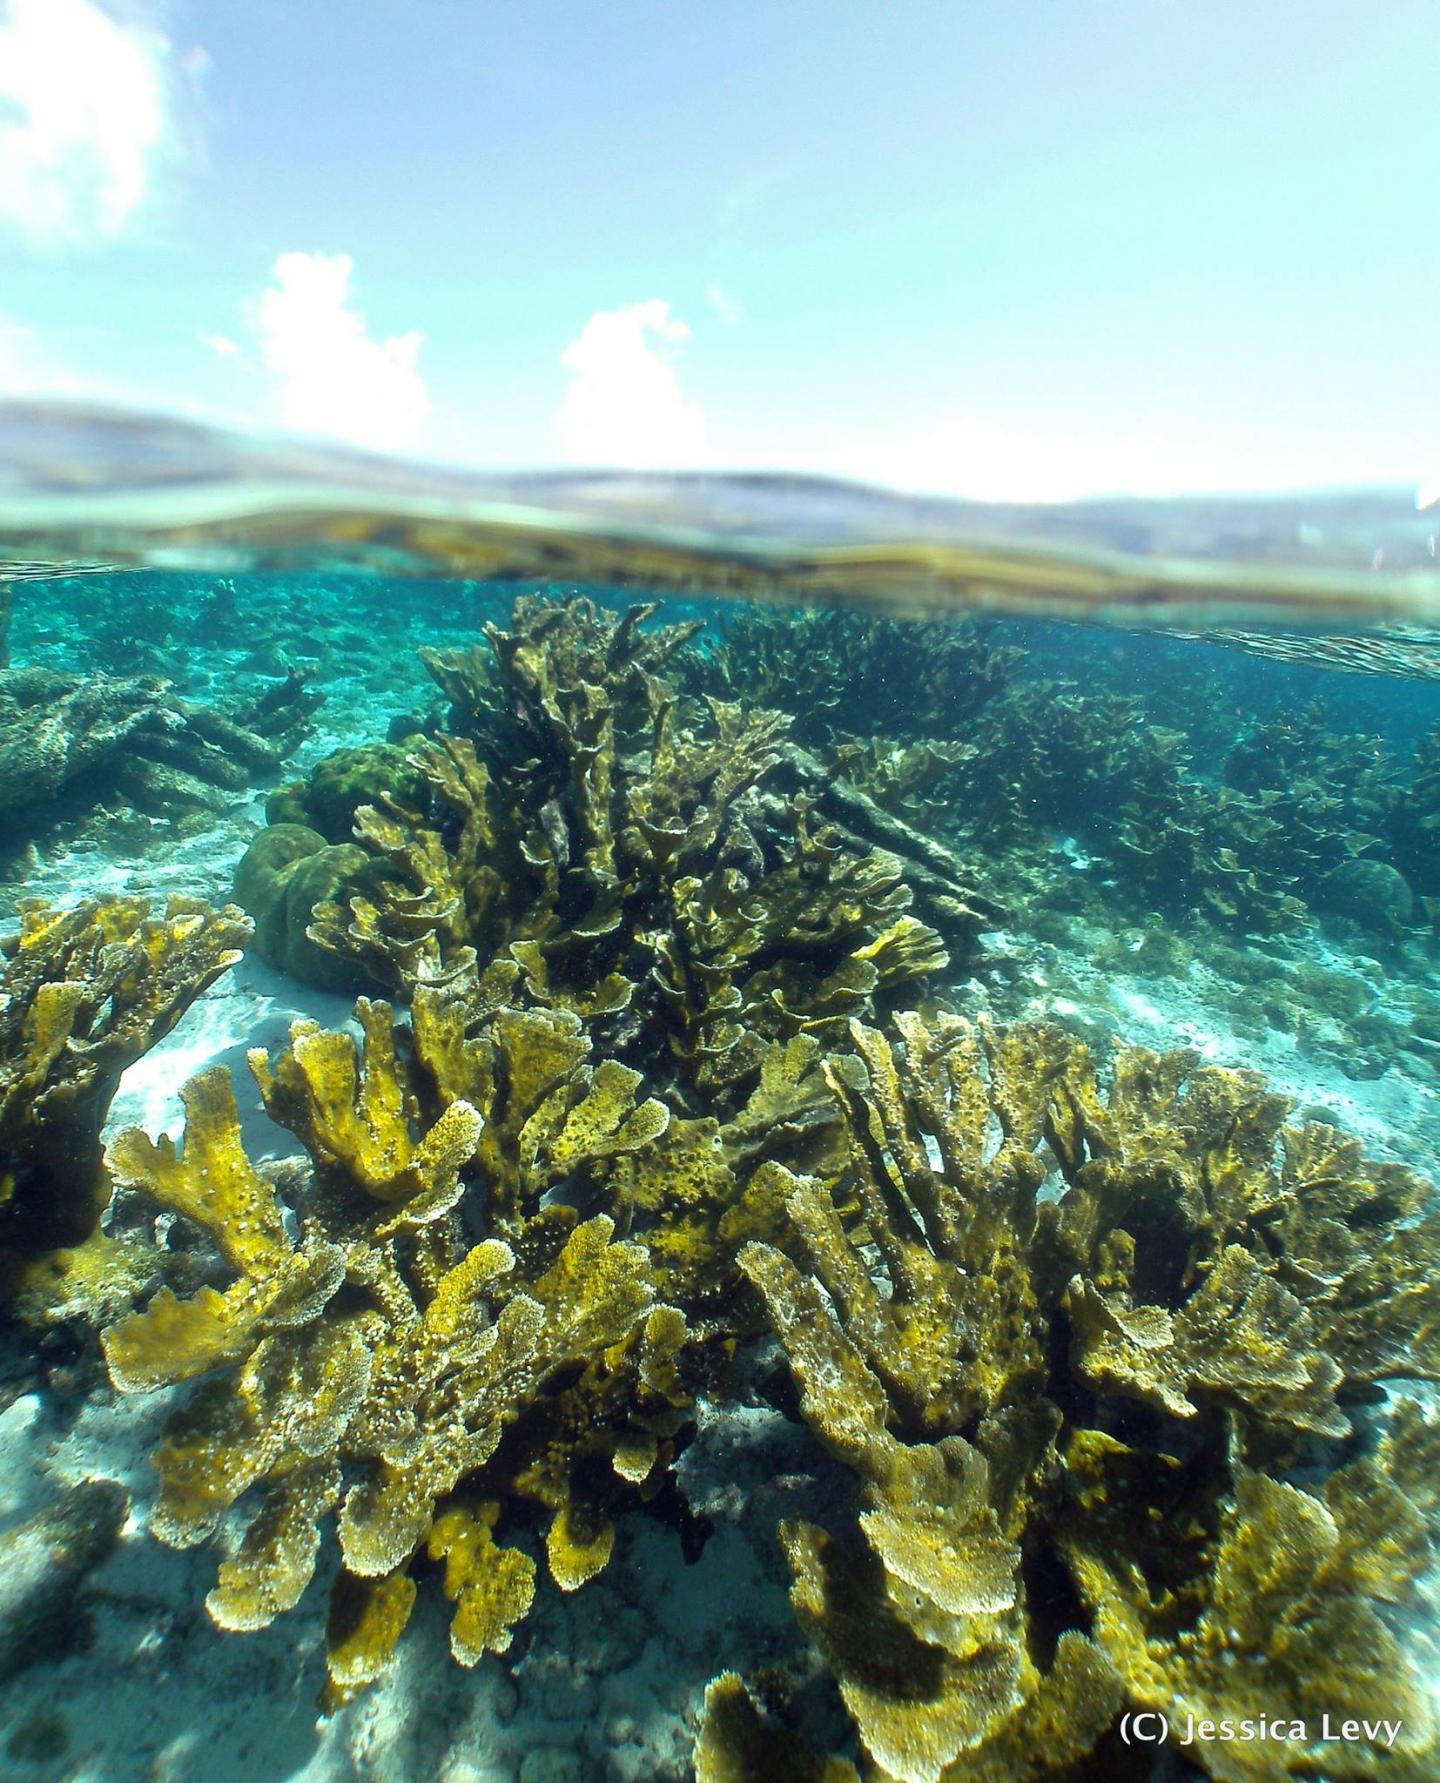 Response to Environmental Change Depends on Variation in Corals+Algae Partnerships